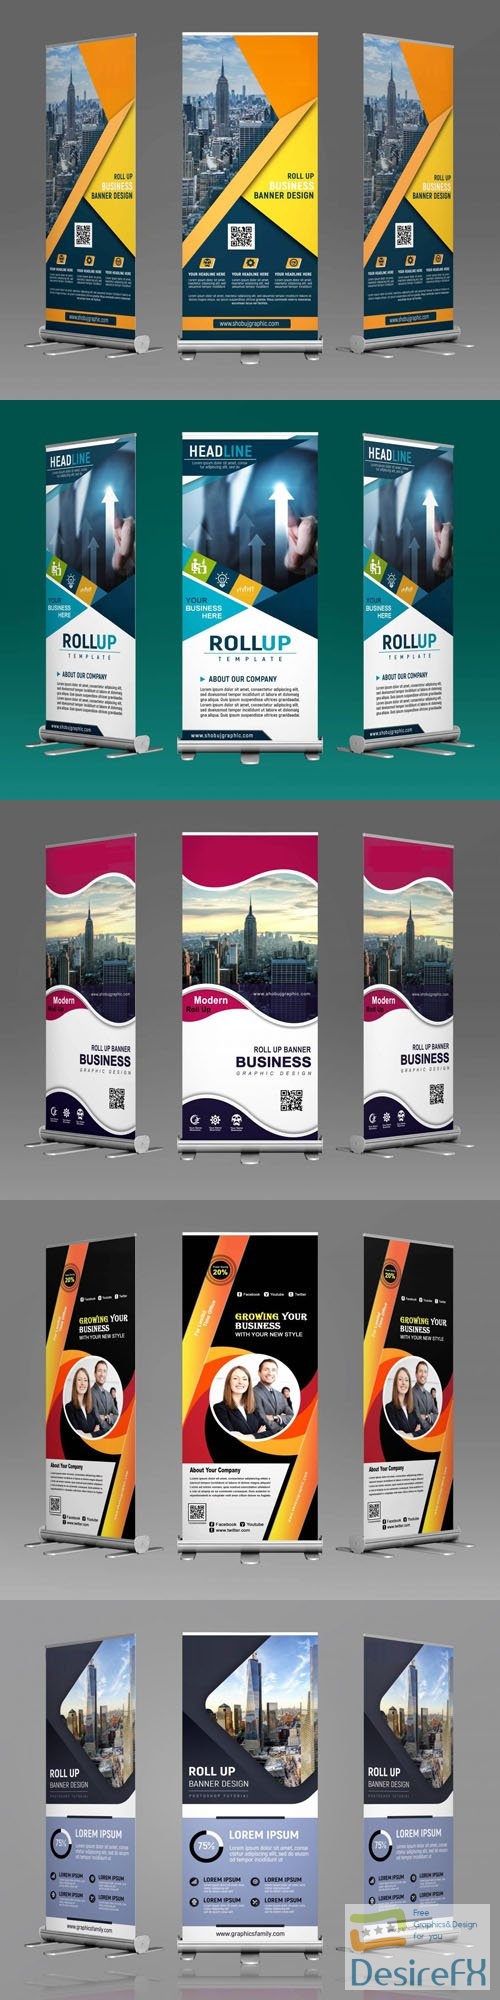 5 Roll-up Banners PSD Templates